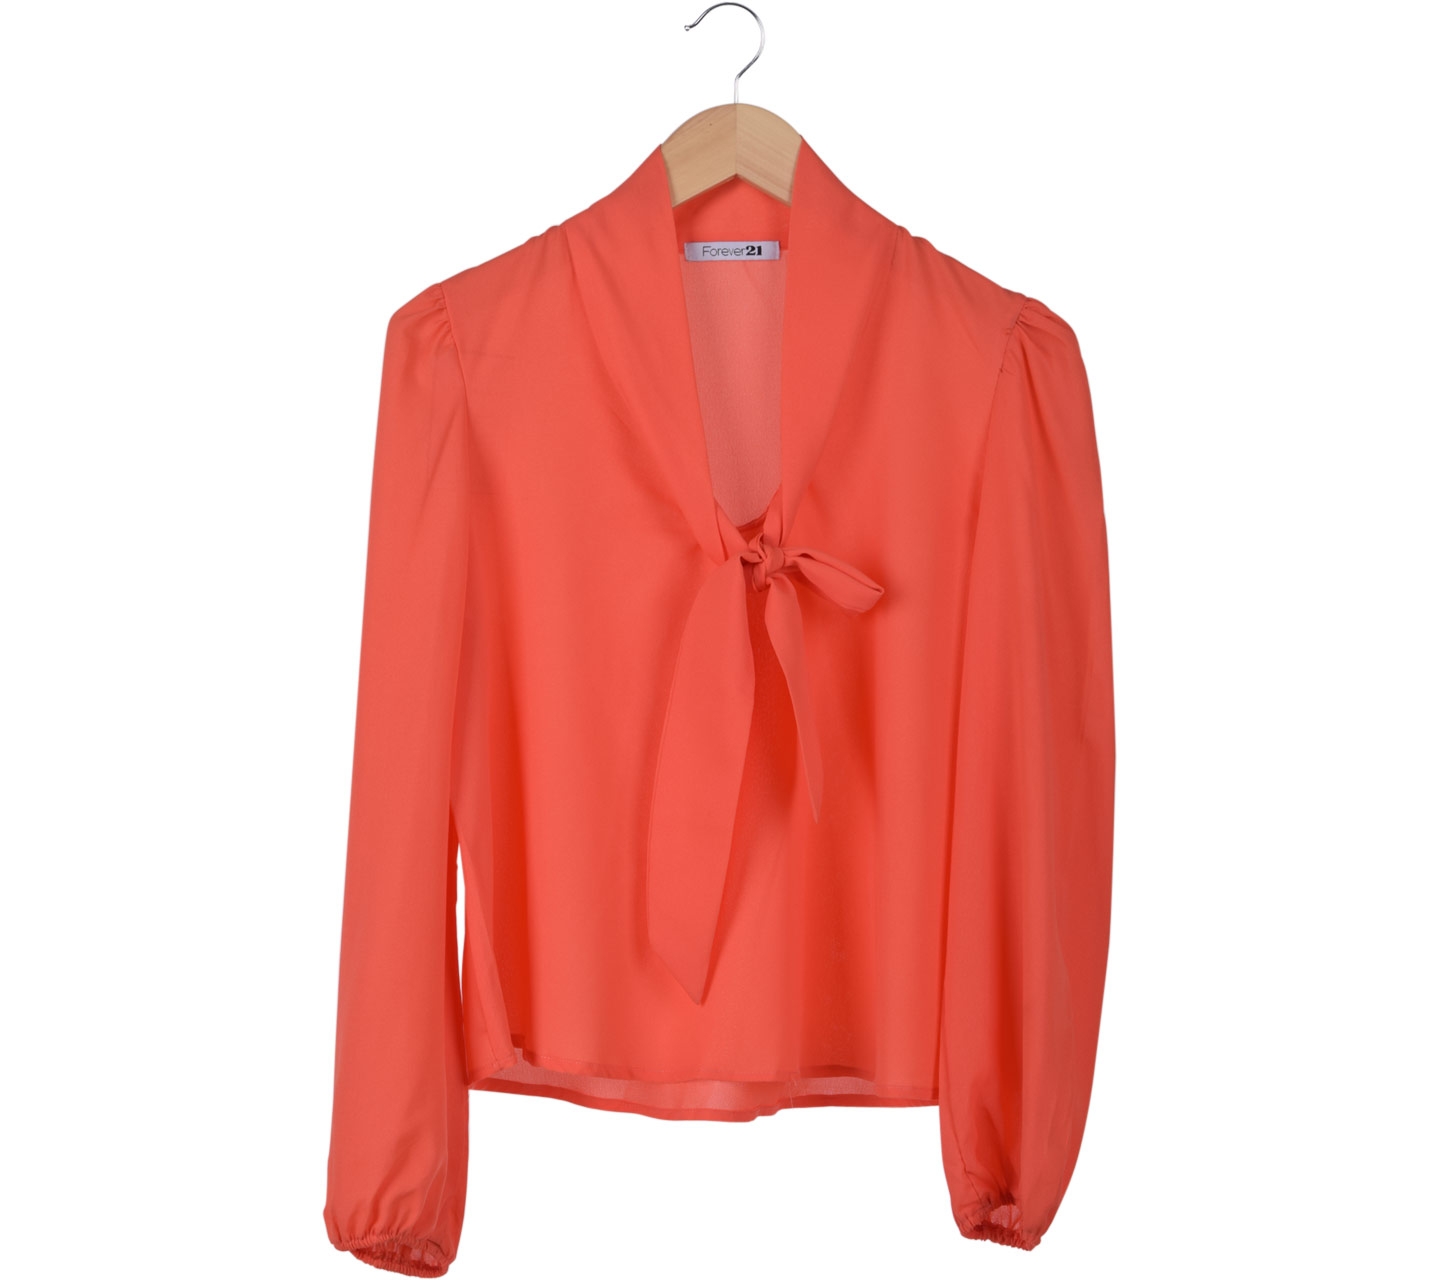 Forever 21 Peach Bowed Blouse